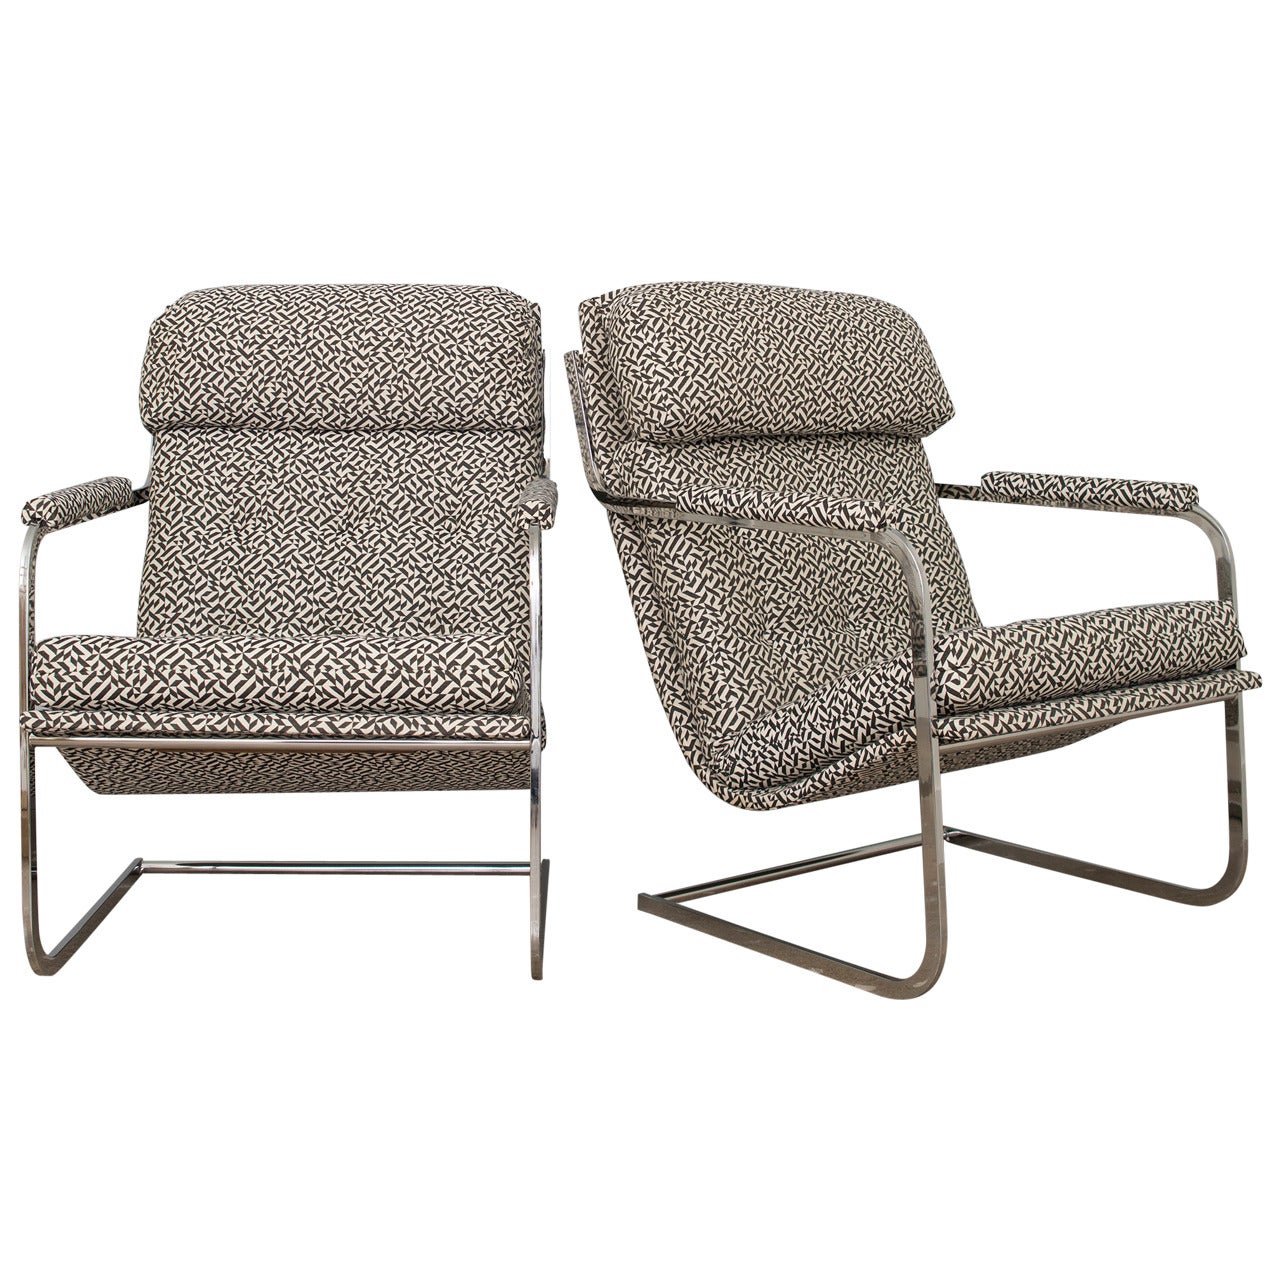 Carsons of High Point Cantilevered Chrome Chairs in Knoll Eclat Fabric